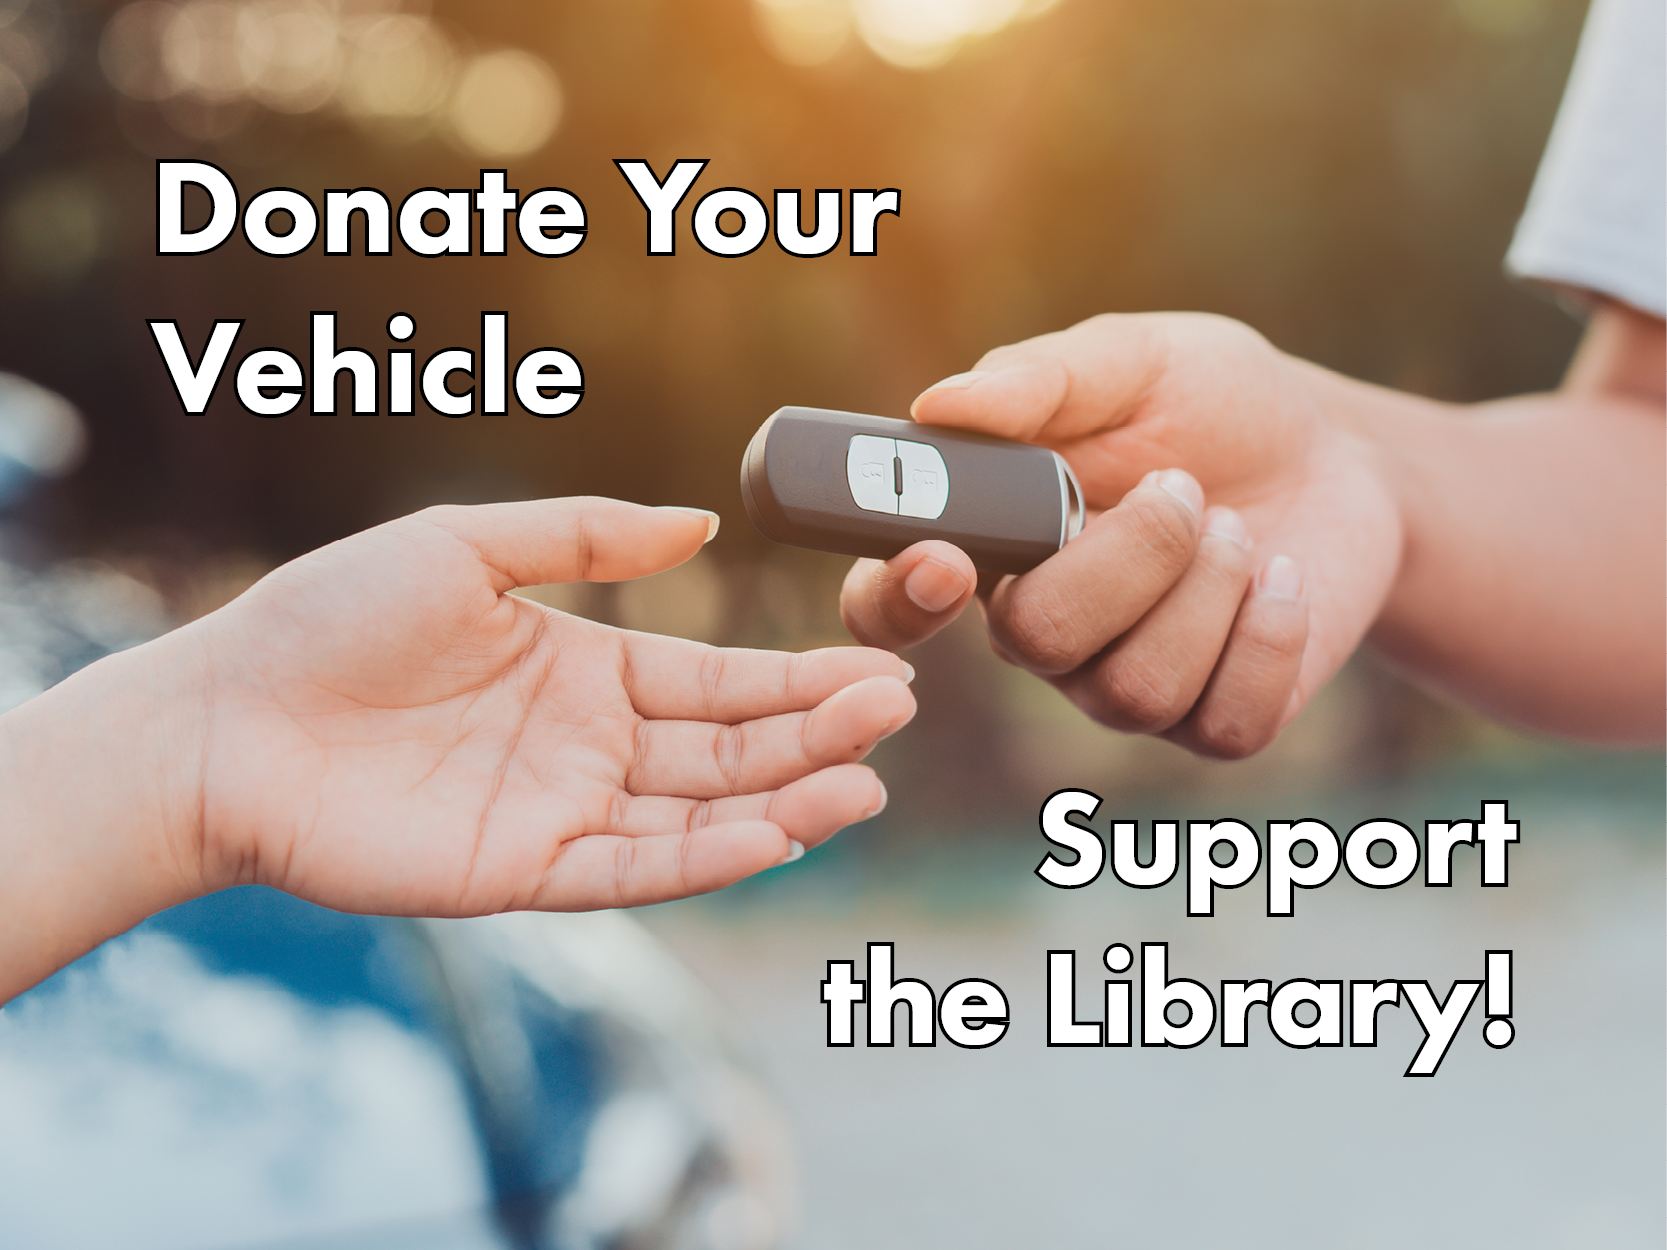 Donate your vehicle to support the Library District